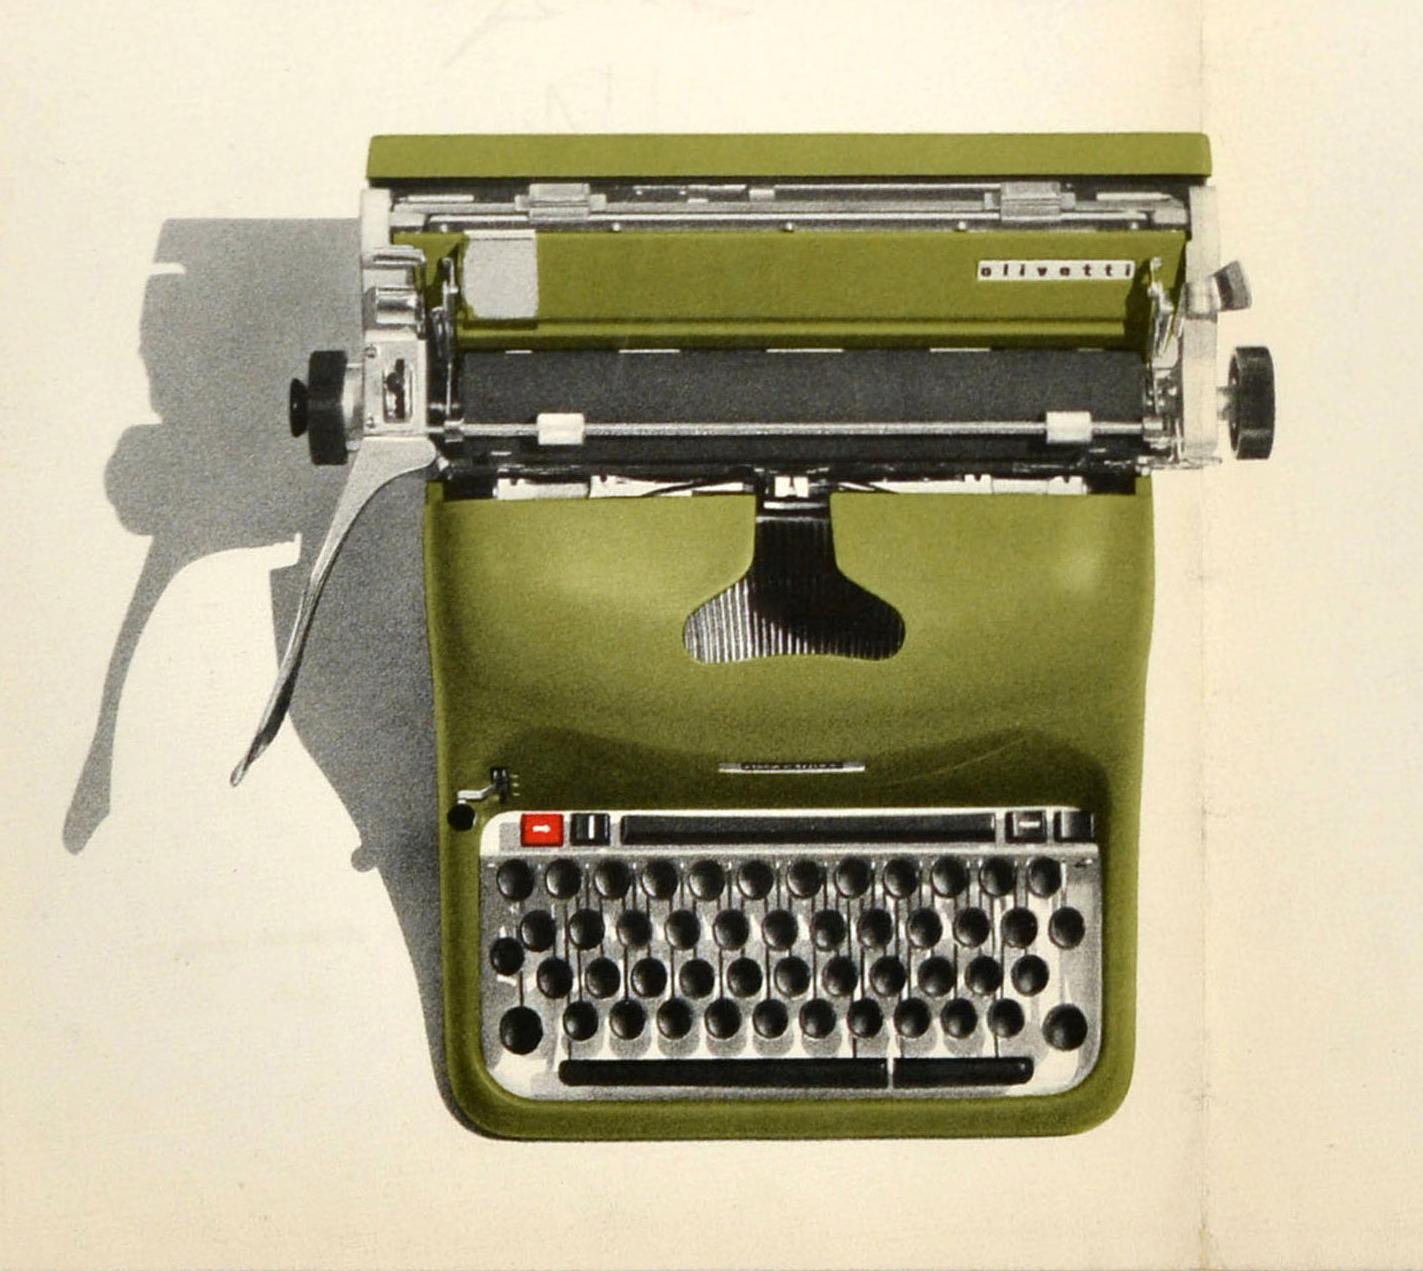 Original vintage advertising poster for the Olivetti Graphika typewriter model featuring a great mid-century graphic design depicting letters of the alphabet on typewriter keys in yellow, white, blue and red circles and lines set over a black